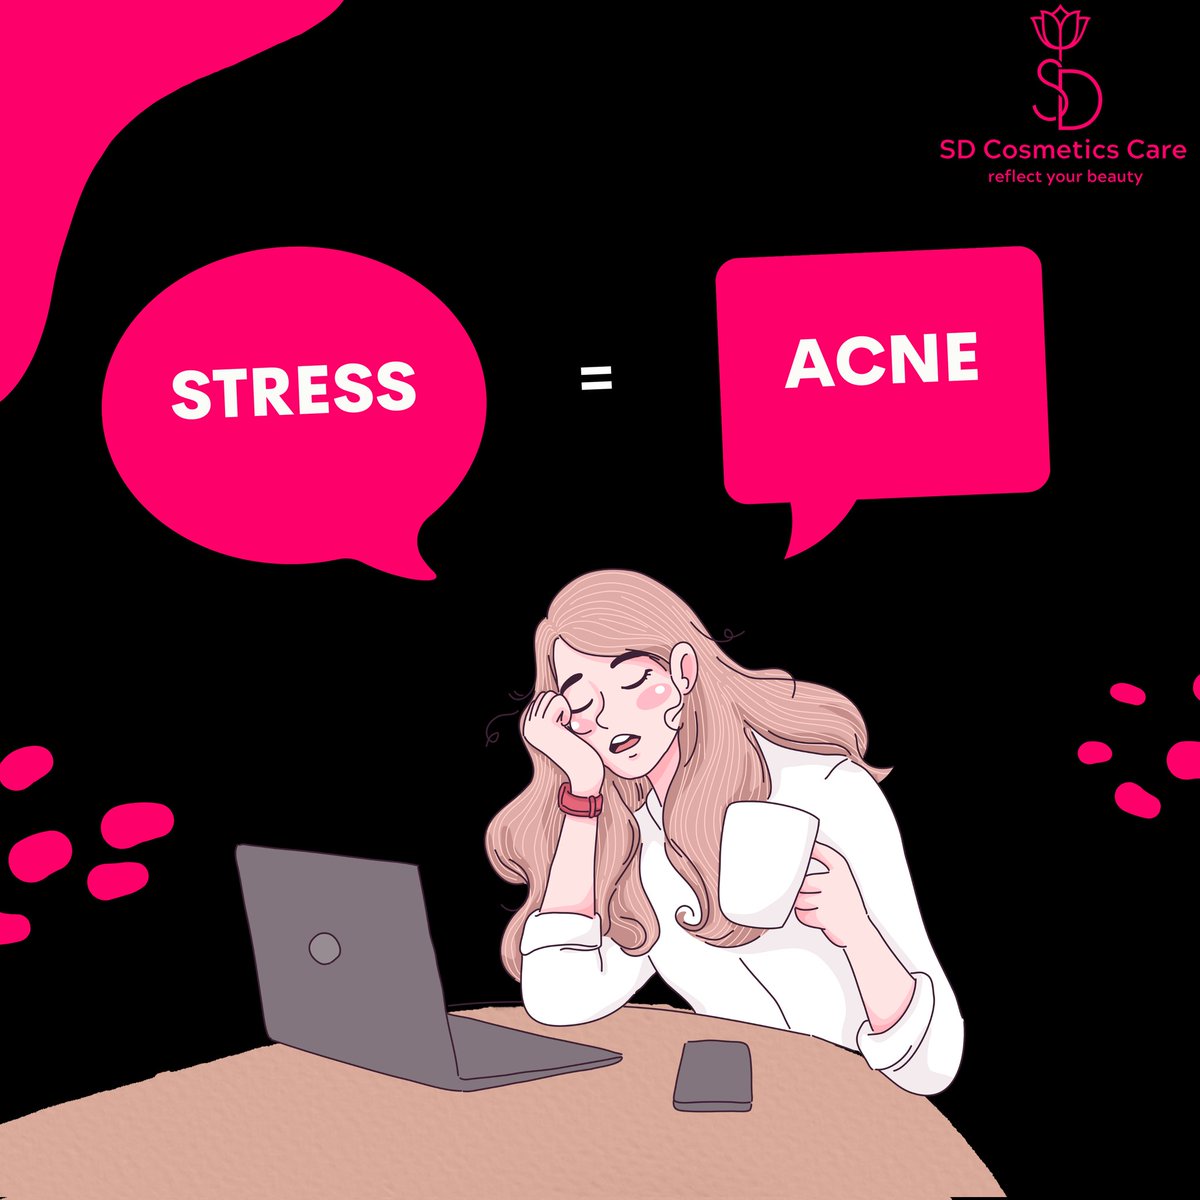 SO YOU KNOW

STRESS = ACNE
.
.
 #stressfree #stress #acneseries #acnecream #stressrelief #acné #acneproblems #stressedout #acnescars #acnetreatments #stressfrei #acnescarring #acnehelp #stressless #intags #stressing #acneserum #stressed #acnetreatment #stressmanagement #acneskin